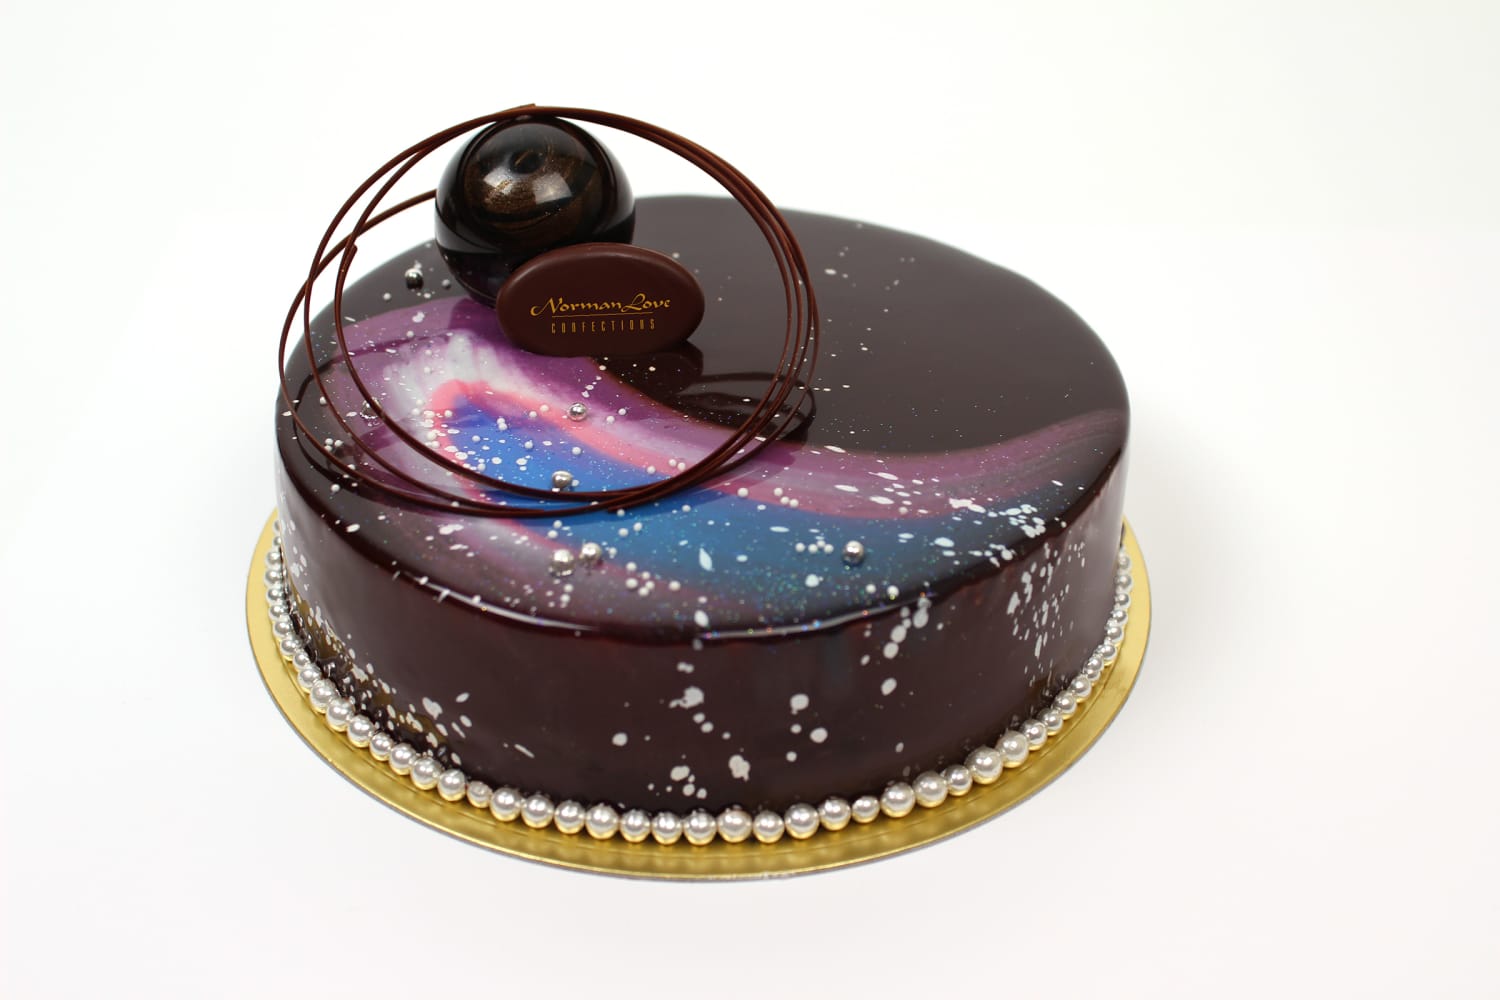 Galaxy cake - The Great British Bake Off | The Great British Bake Off